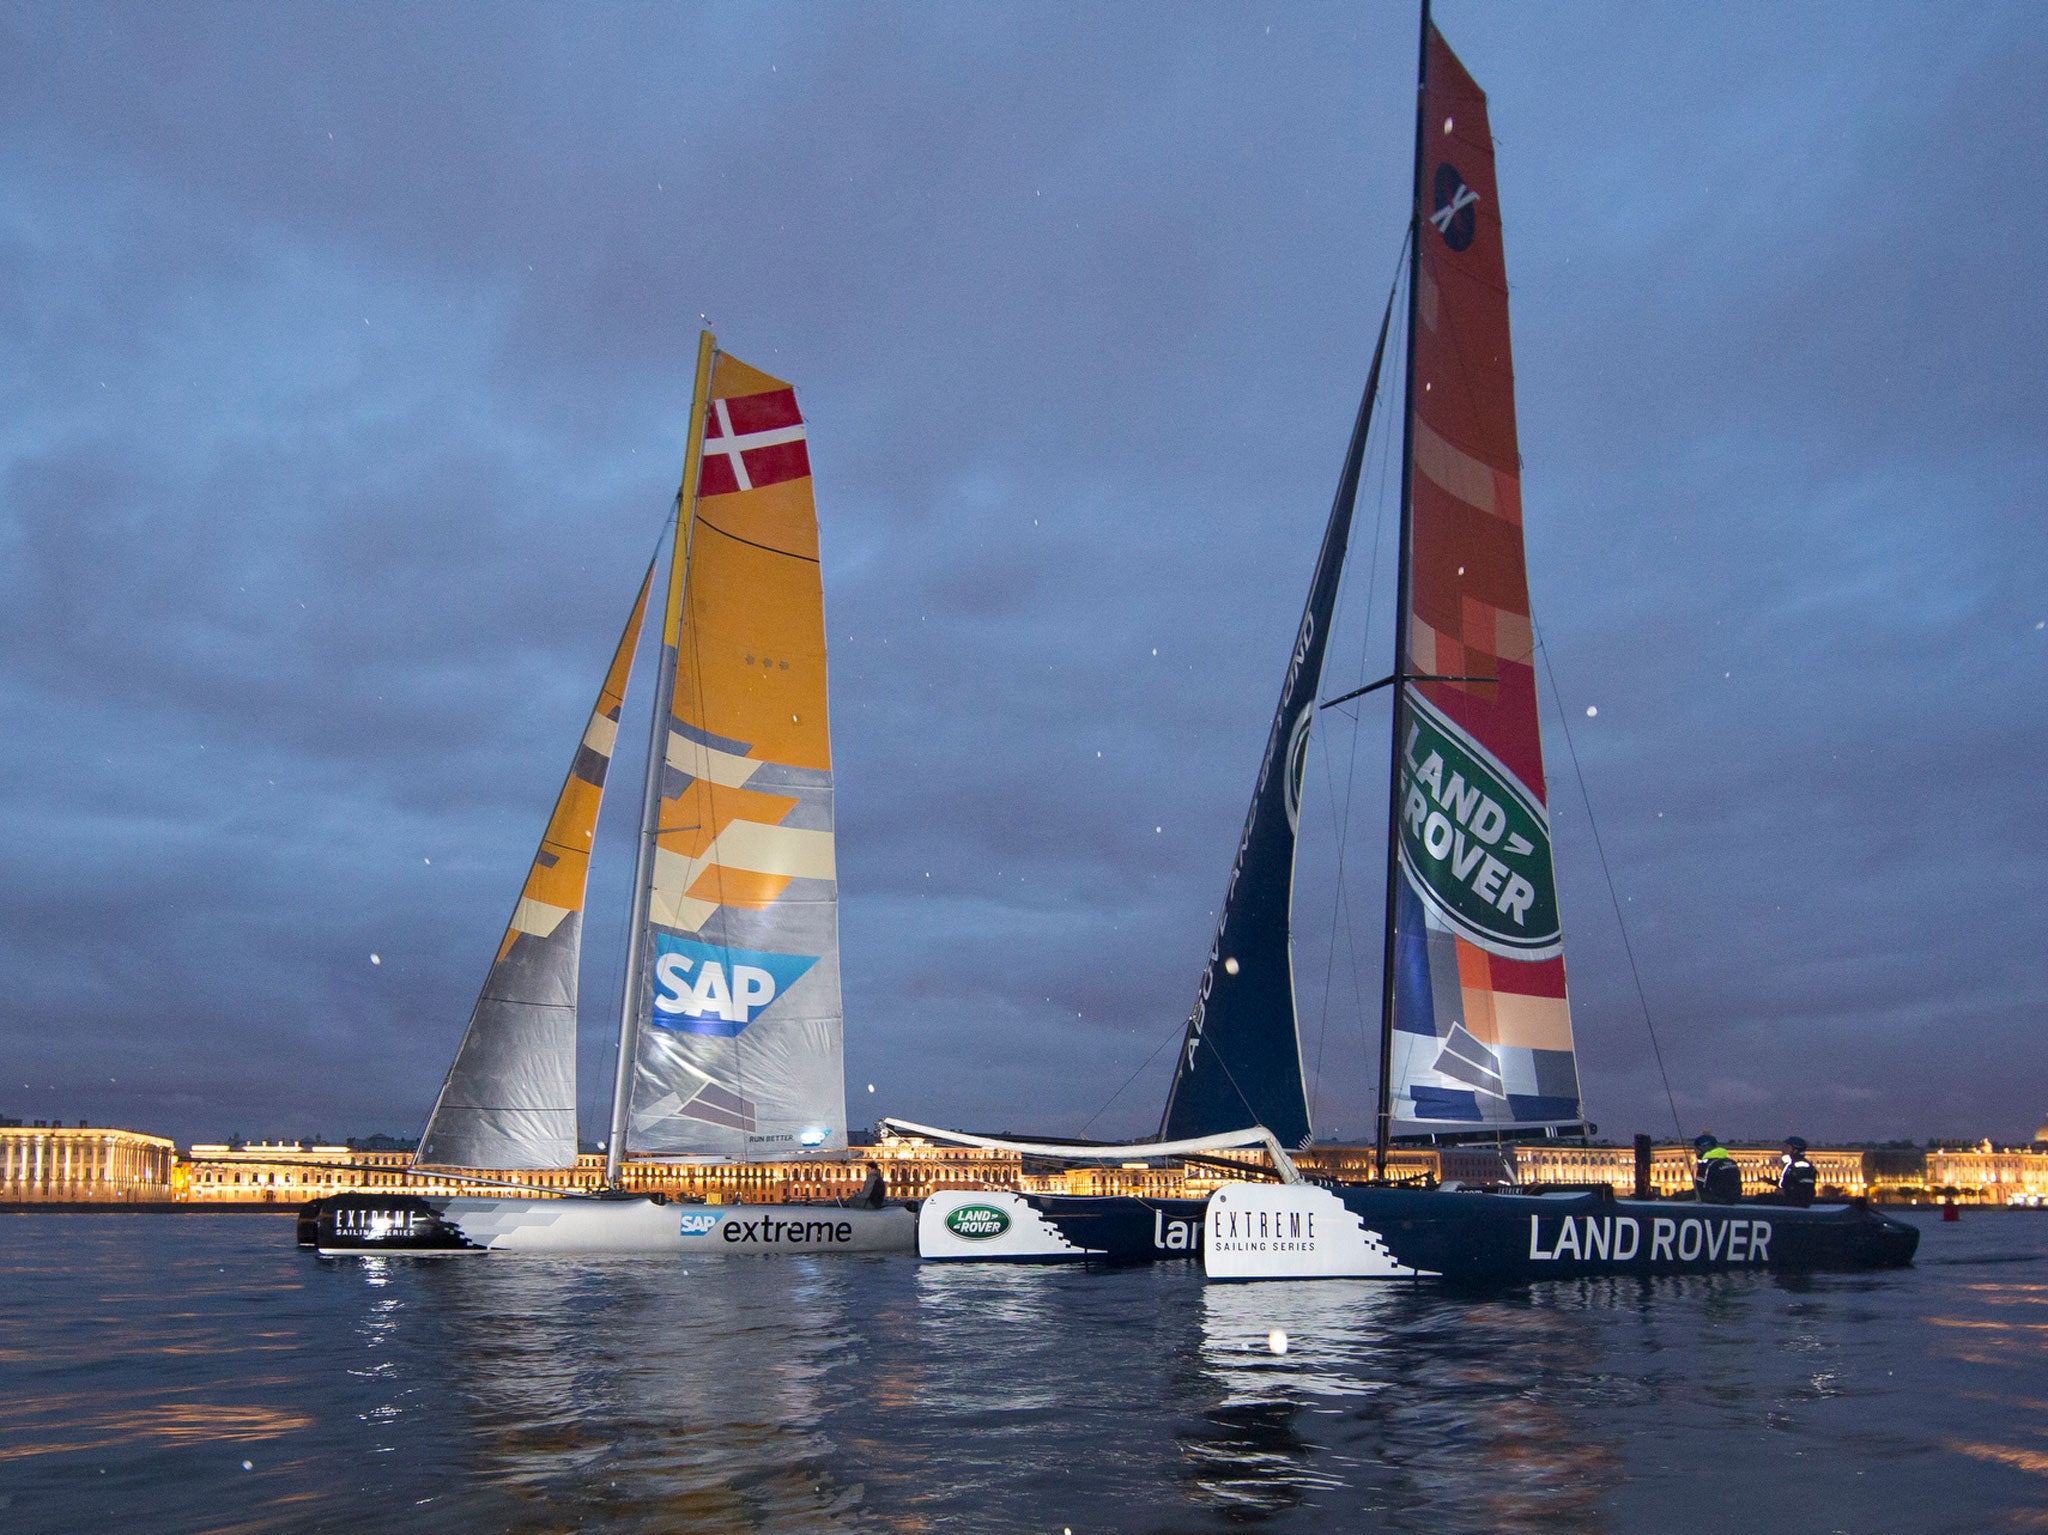 In the dead of night, though still midsummer light, two of the Extreme 40 catamarans ghost their way up to St. Petersburg's Winter Palace for the fourth regatta in the Extreme Sailing Series.